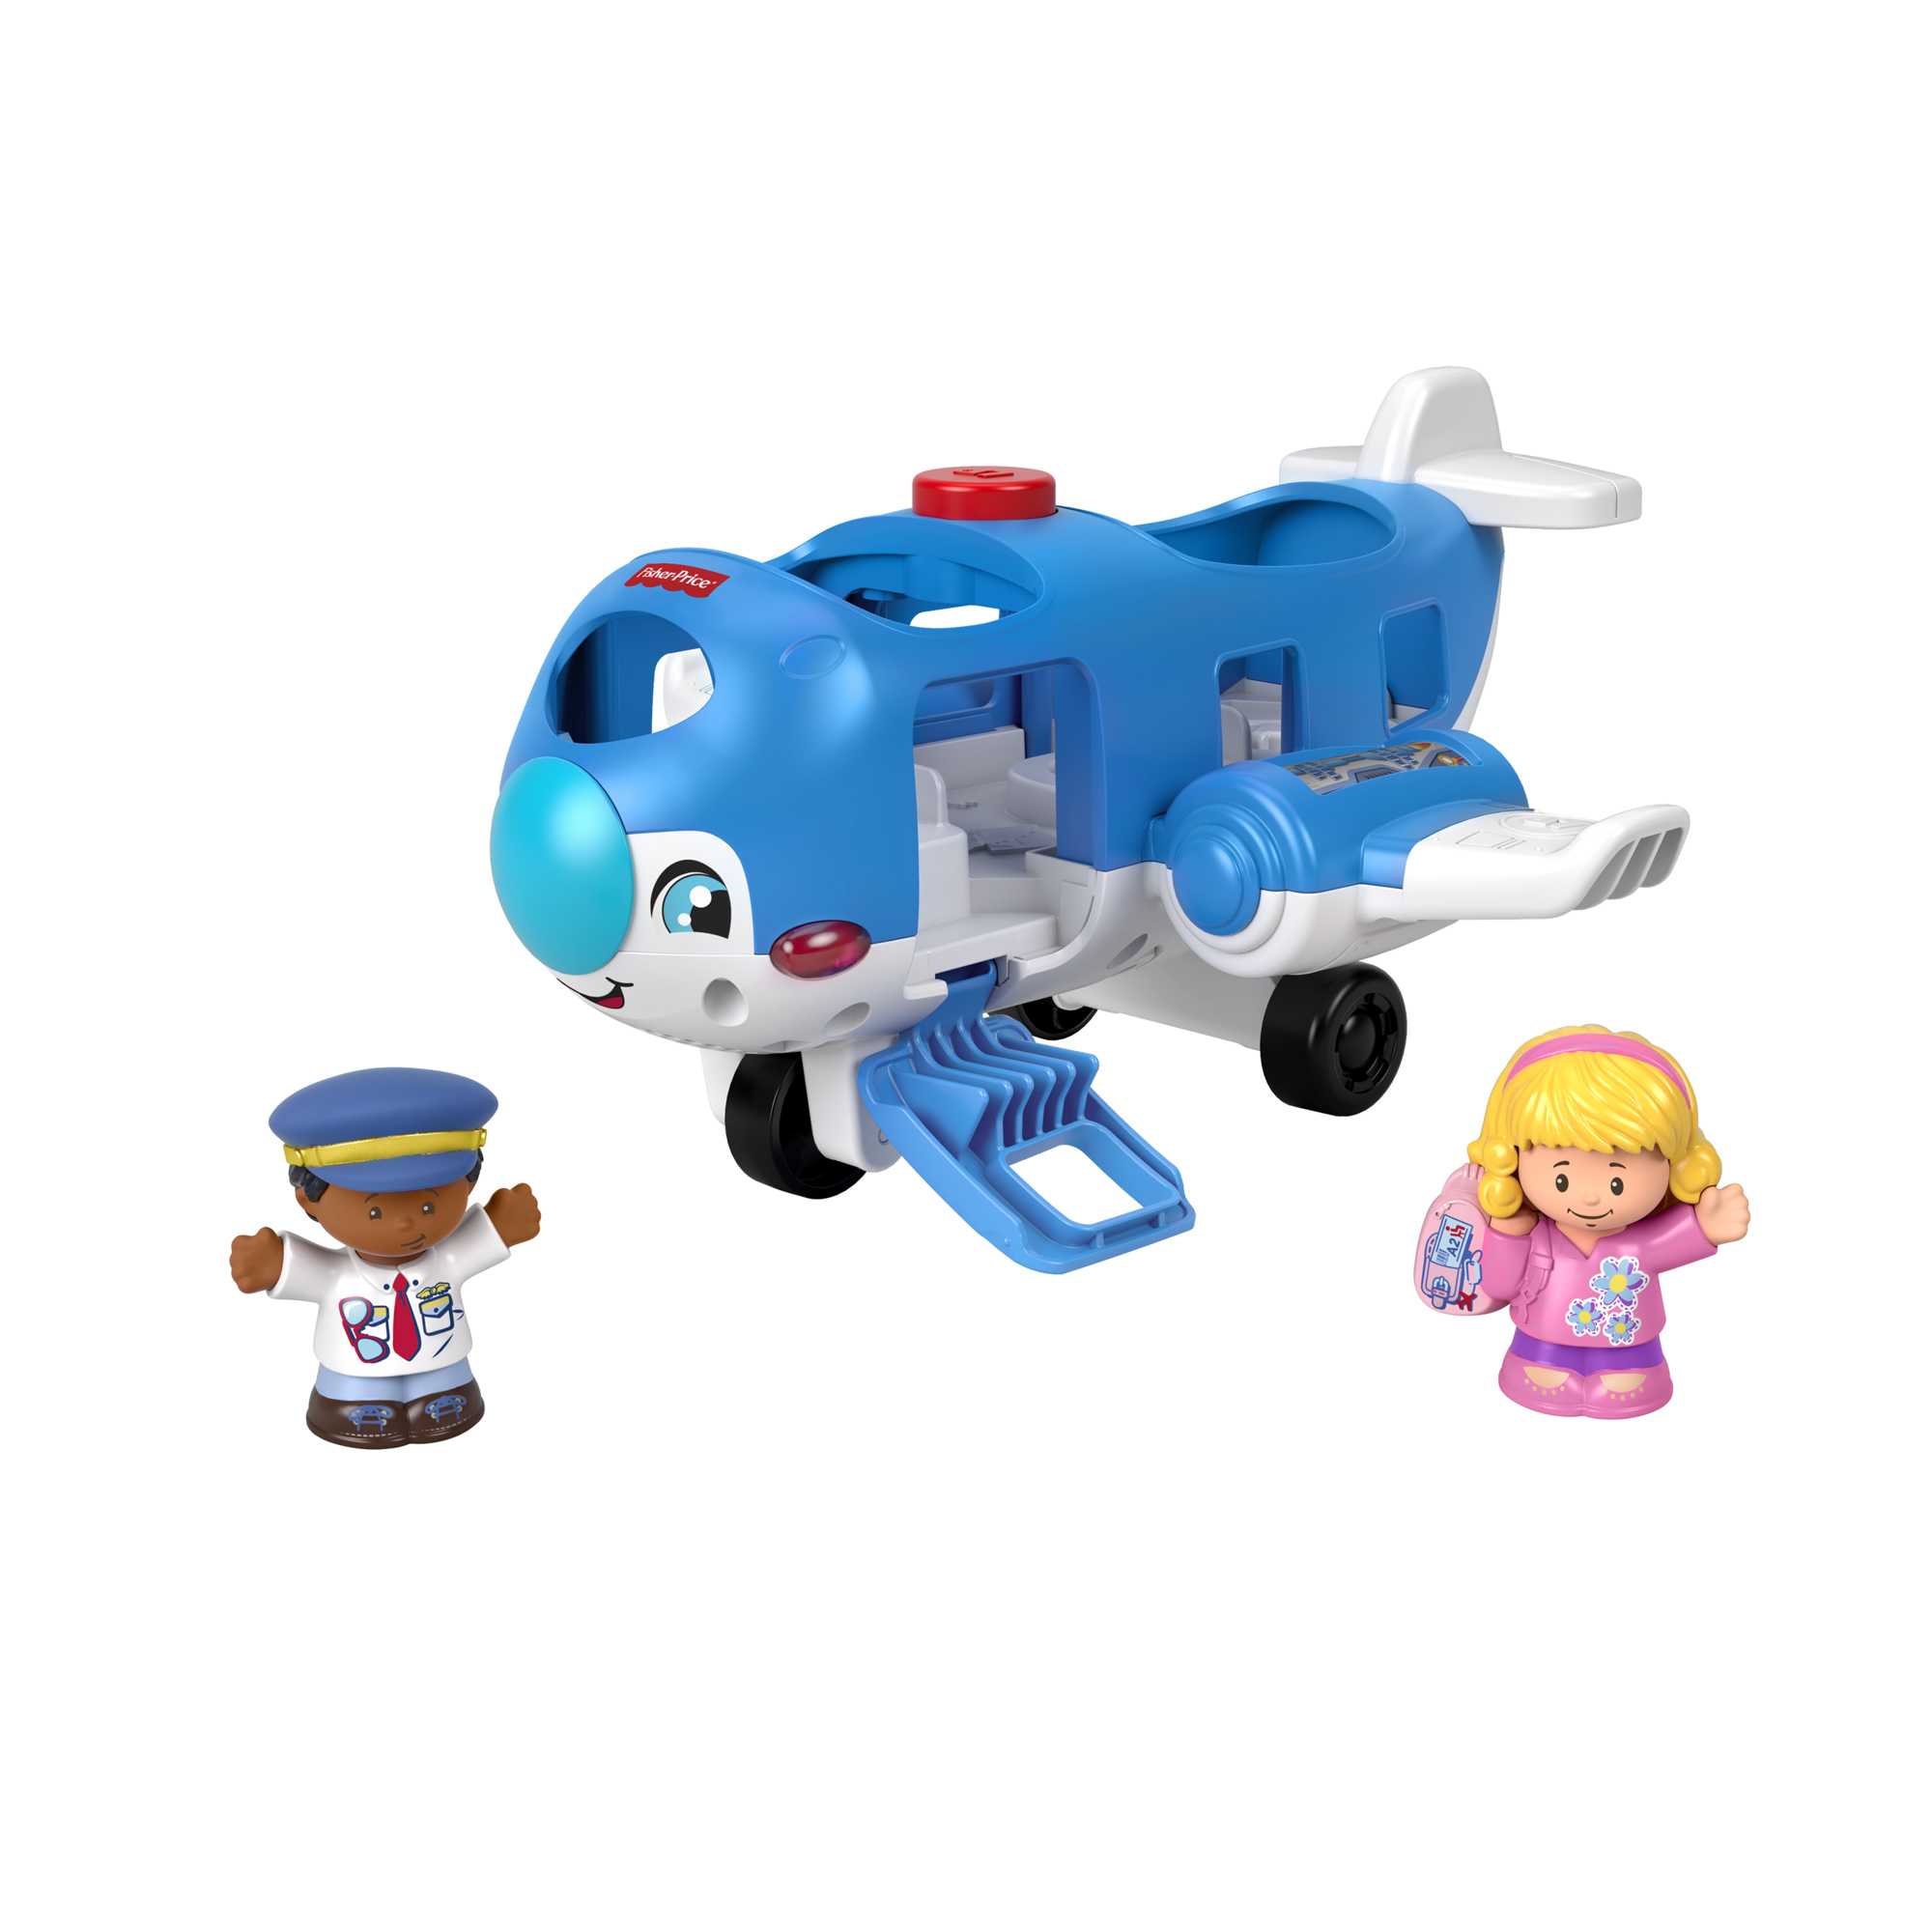 Fisher-Price Little People Travel Together Airplane Musical Toddler Toy with 2 Figures - image 1 of 8